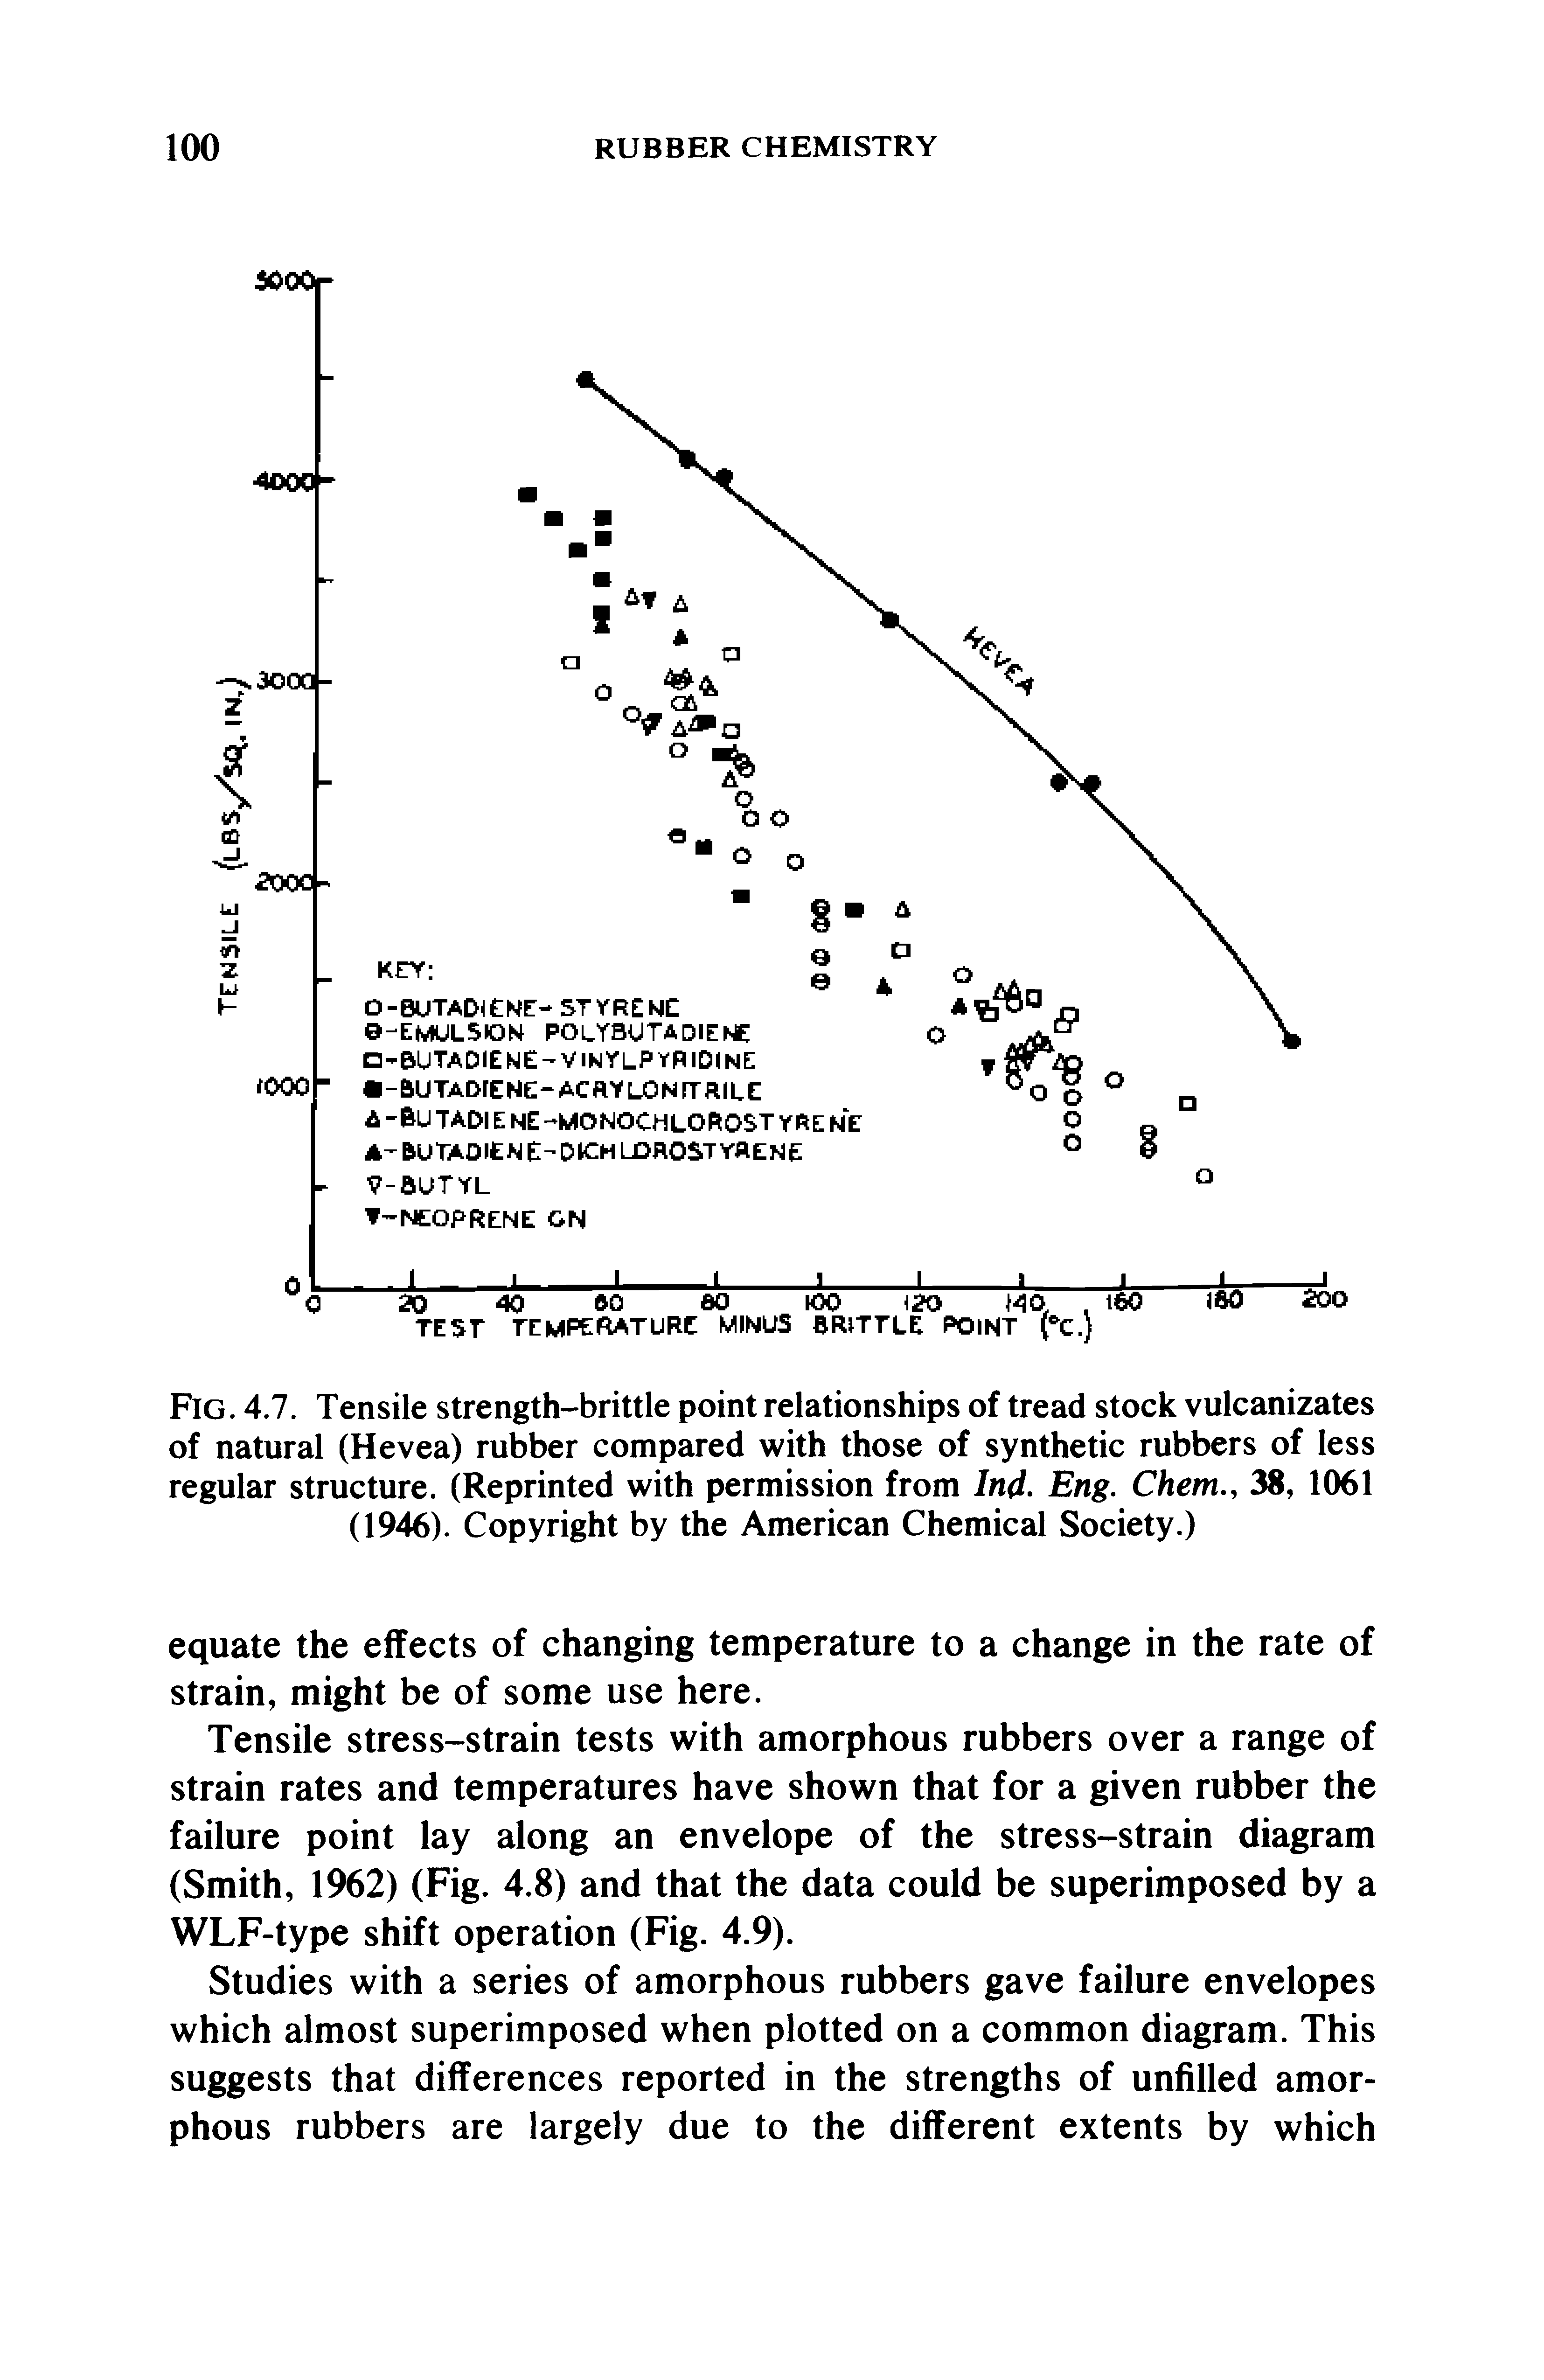 Fig. 4.7. Tensile strength-brittle point relationships of tread stock vulcanizates of natural (Hevea) rubber compared with those of synthetic rubbers of less regular structure. (Reprinted with permission from Ind. Eng. Chem., 38, 1061 (1946). Copyright by the American Chemical Society.)...